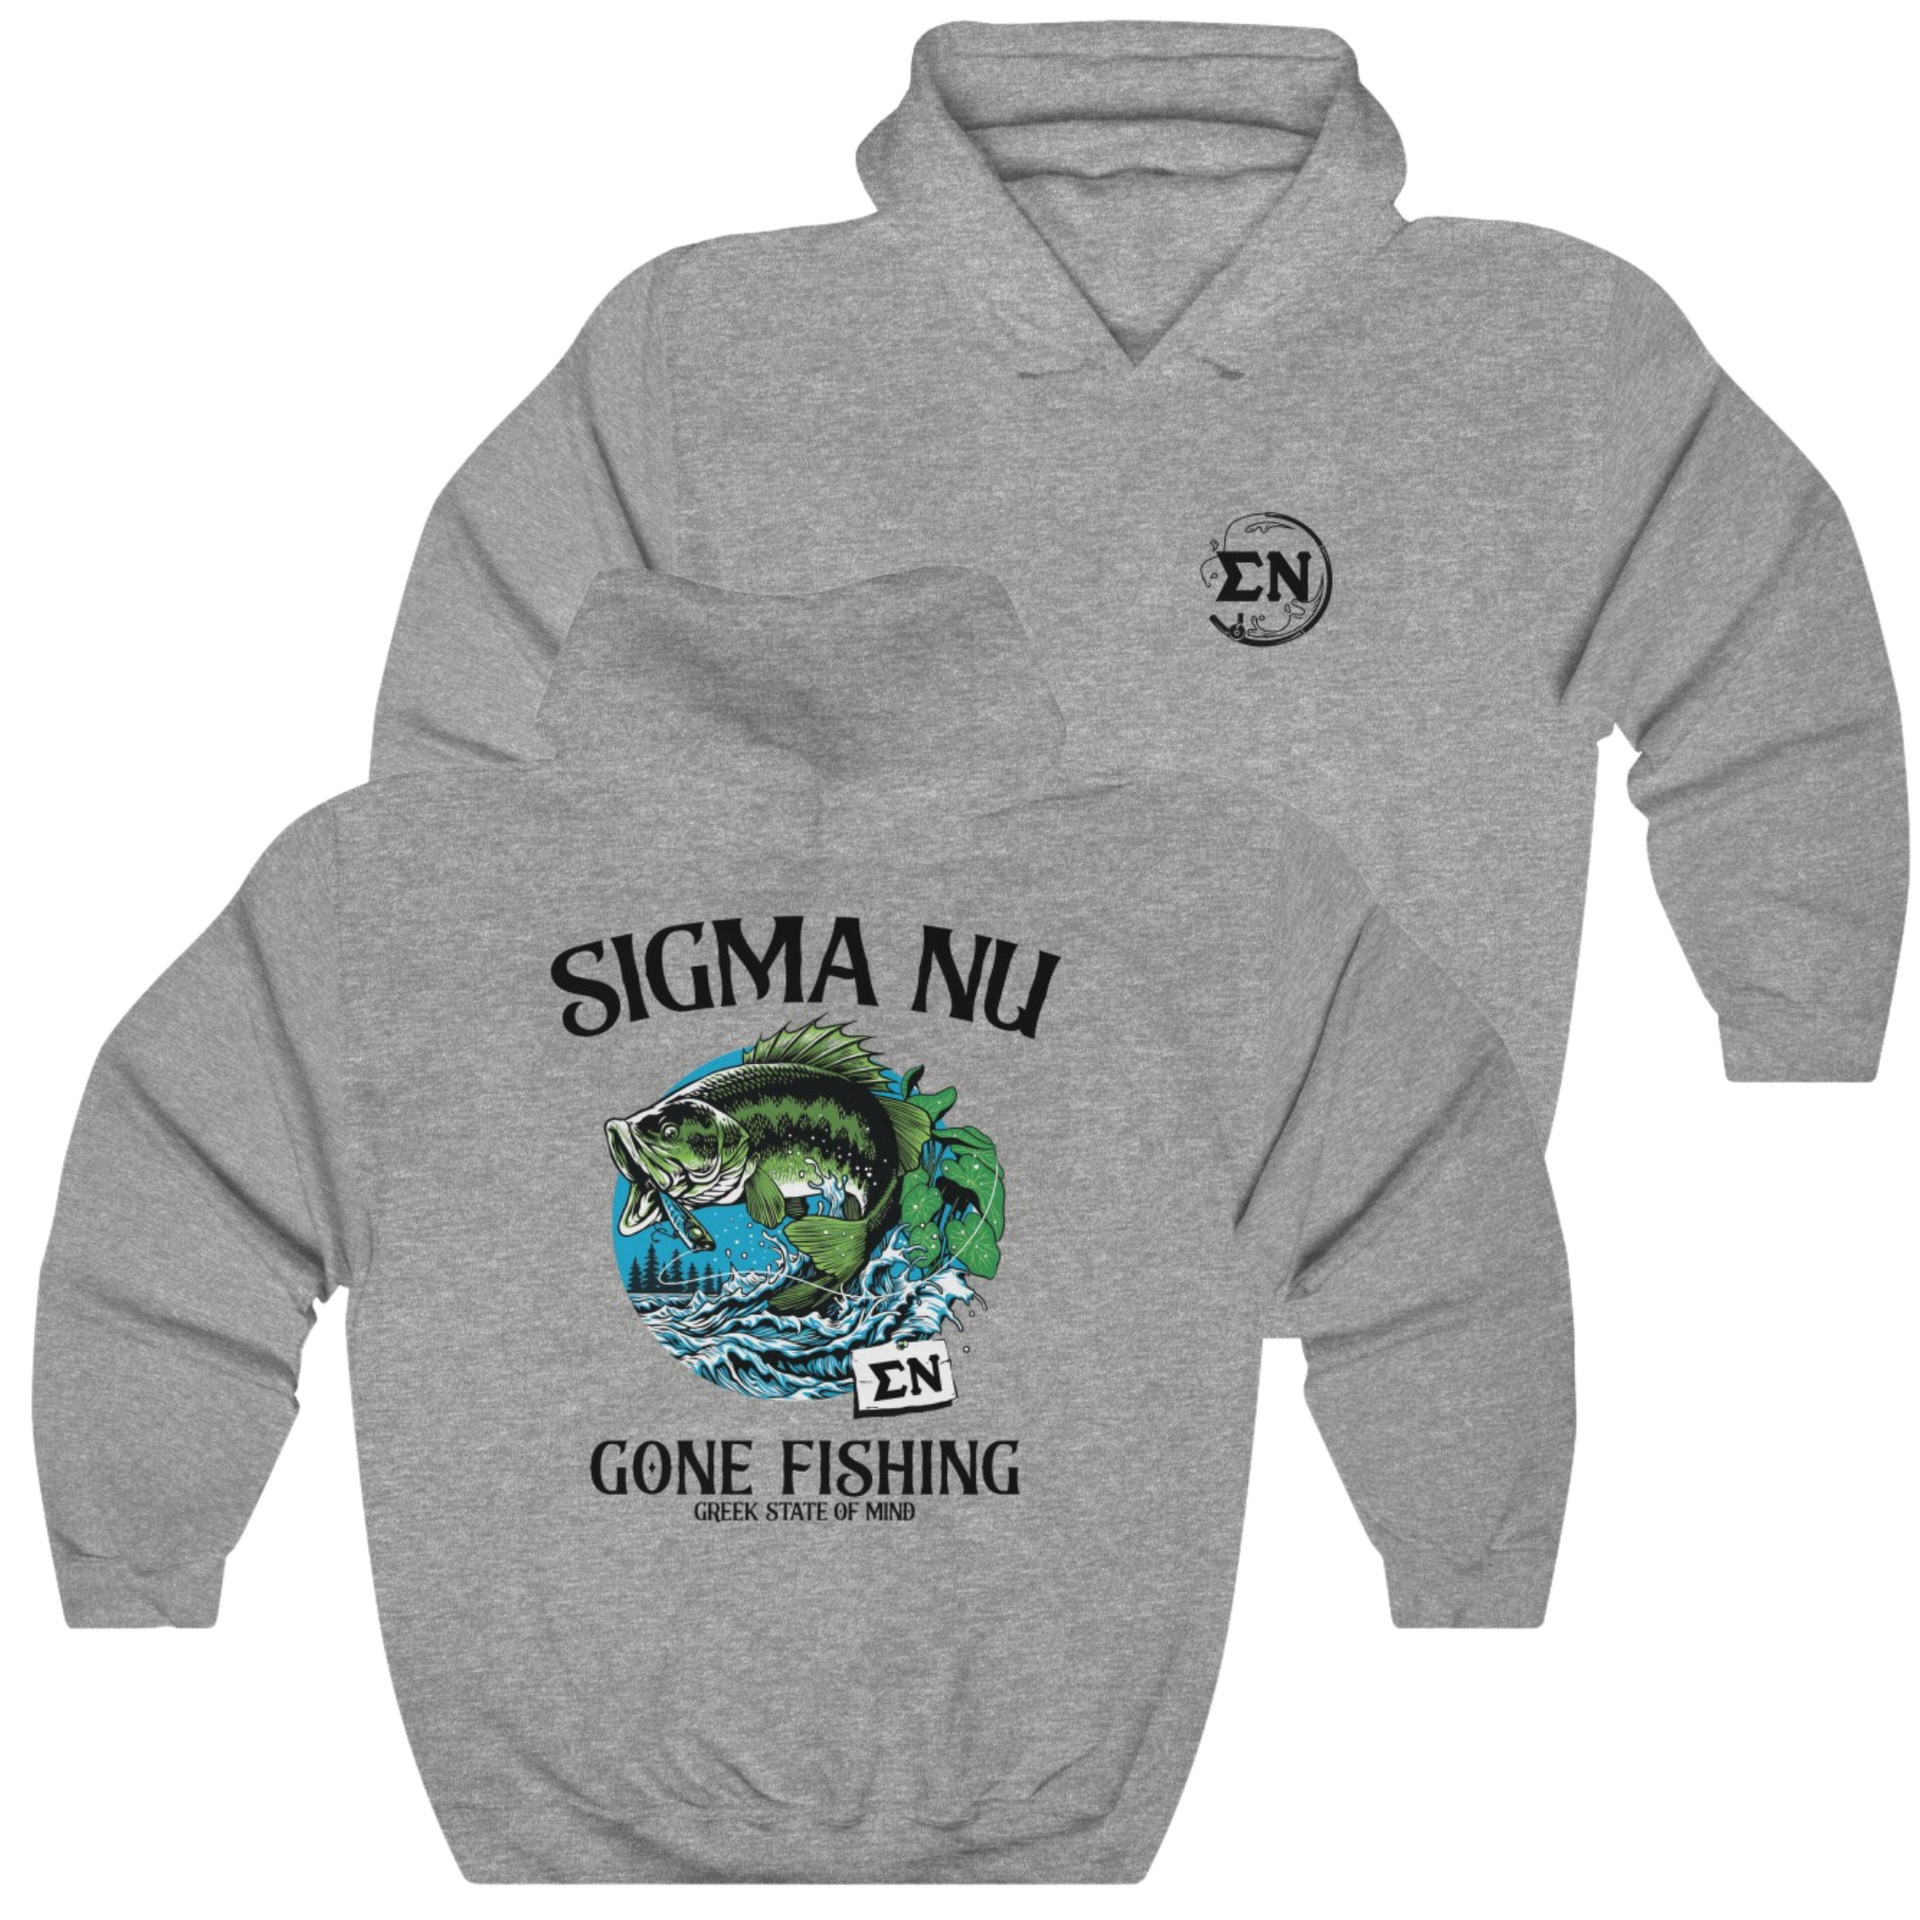 Grey Sigma Nu Graphic Hoodie | Gone Fishing | Sigma Nu Clothing, Apparel and Merchandise